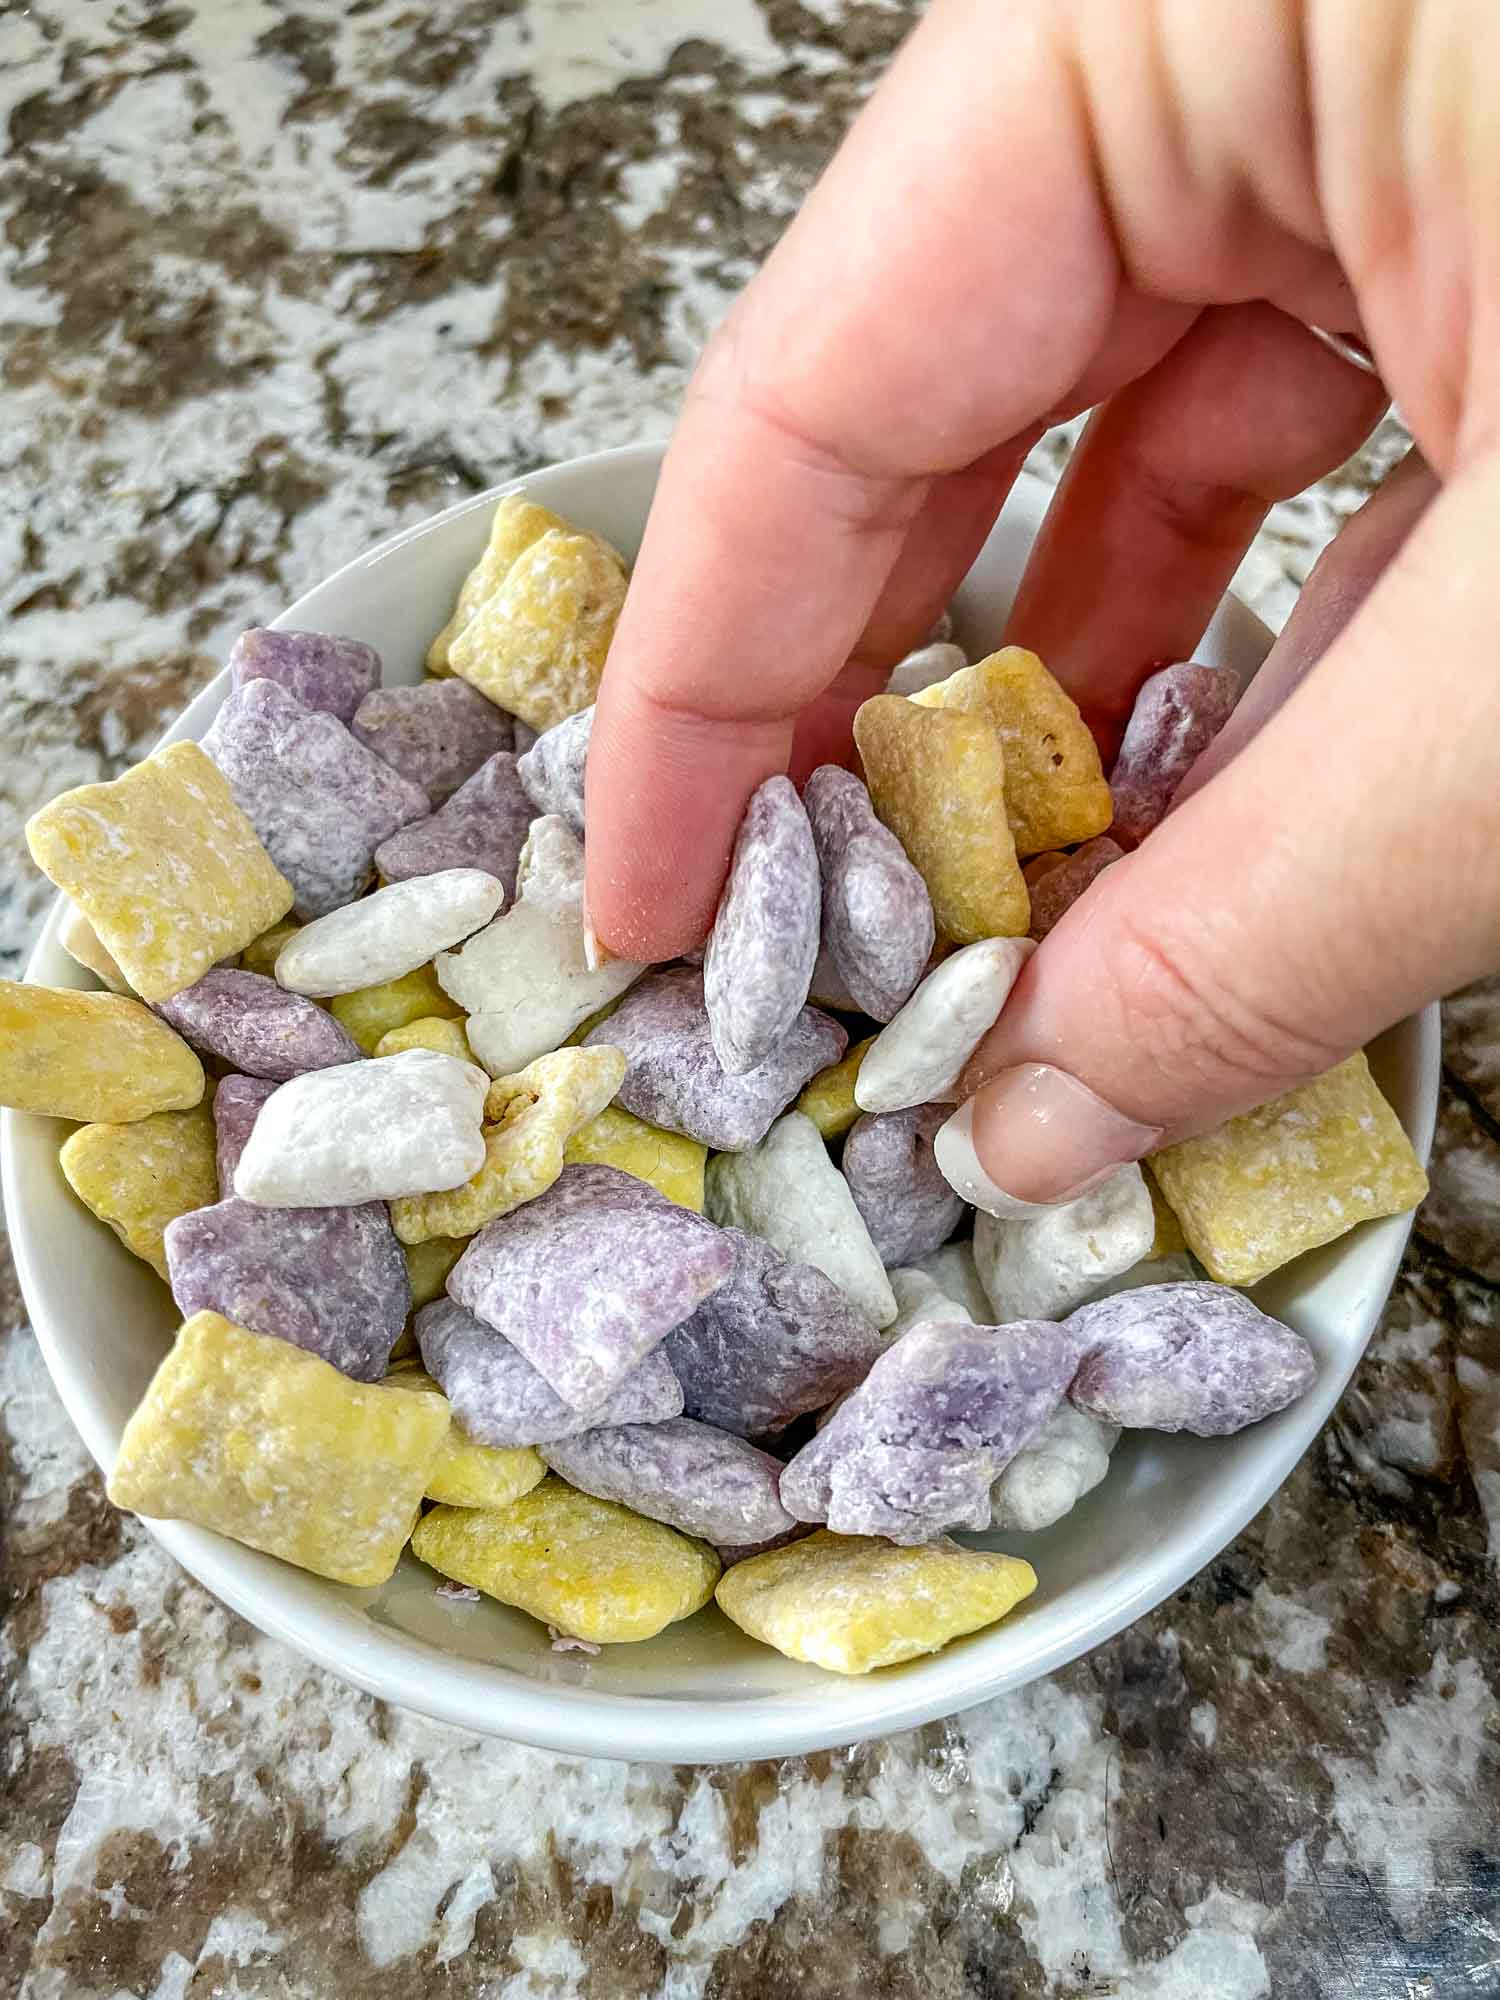 A hand grabbing Minnesota Vikings Puppy Chow out of a bowl